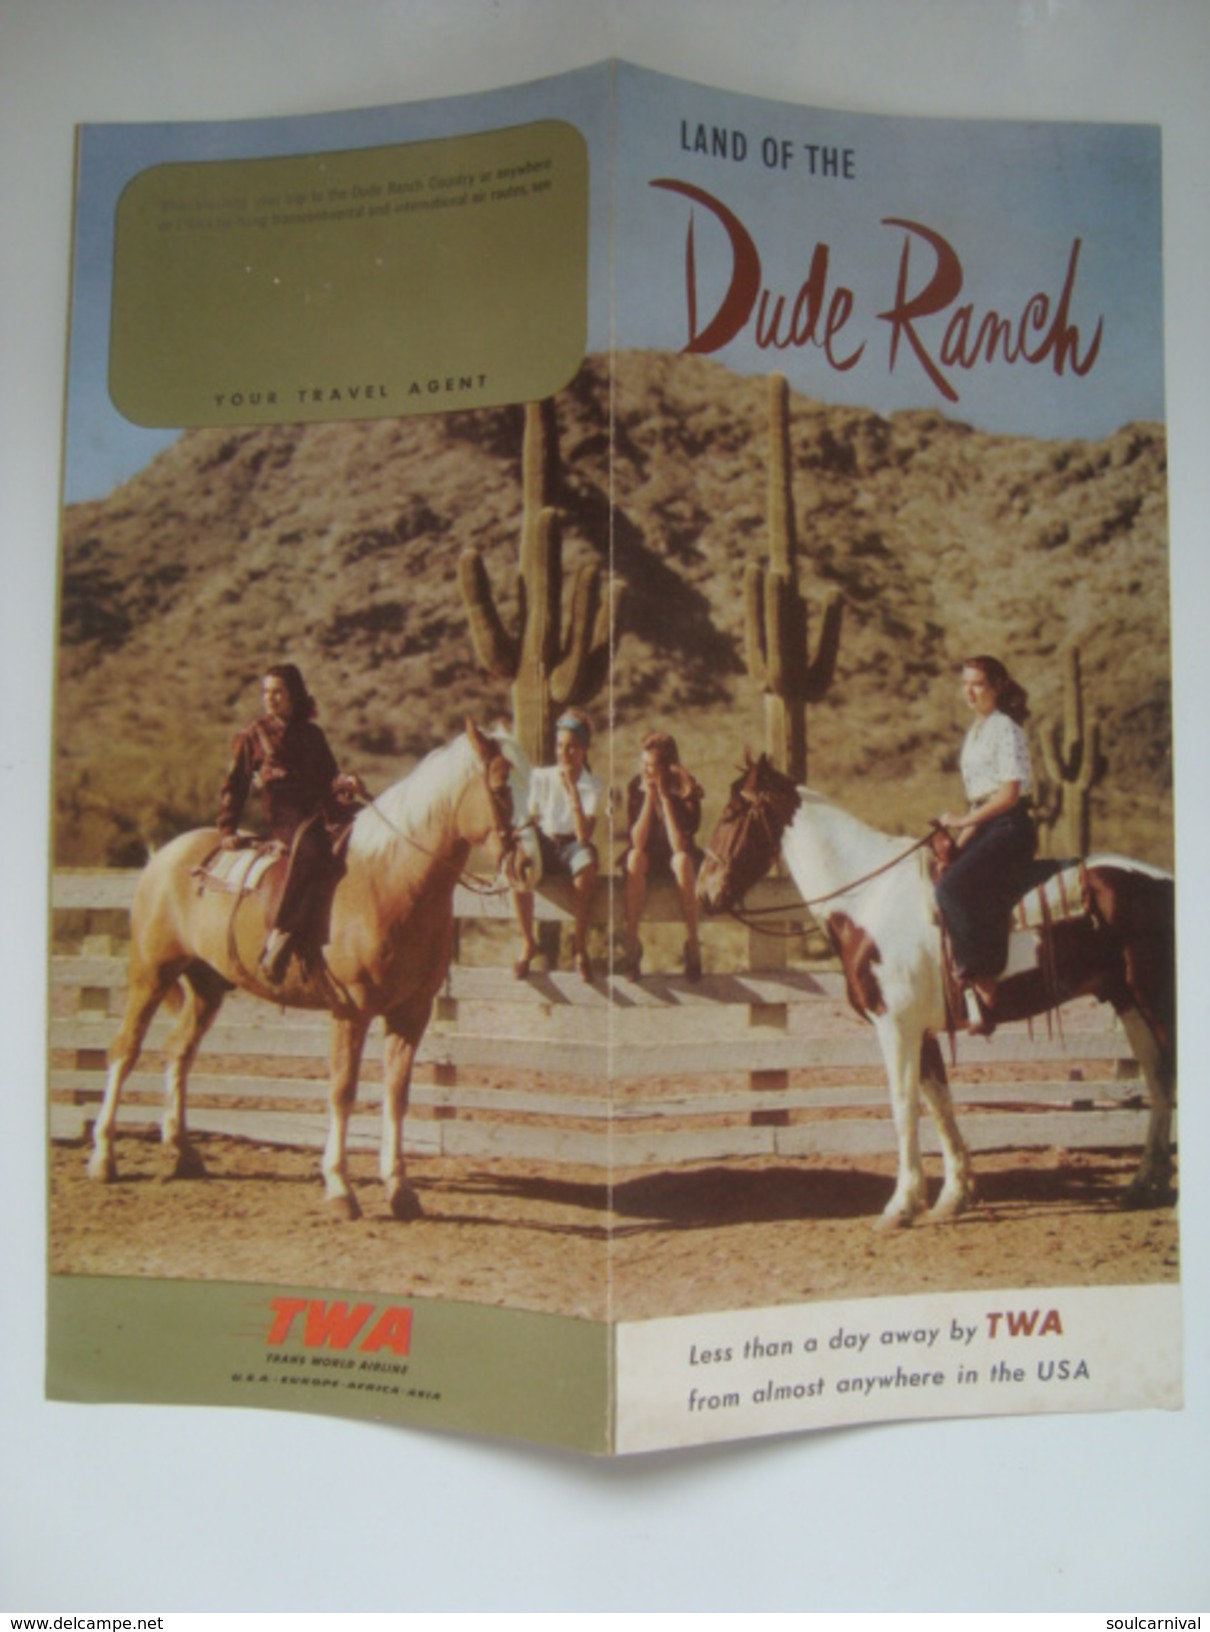 TWA. LAND OF THE DUDE RANCH - USA 50s AVIATION. 6 PAGES PAMPHLET. - Advertenties